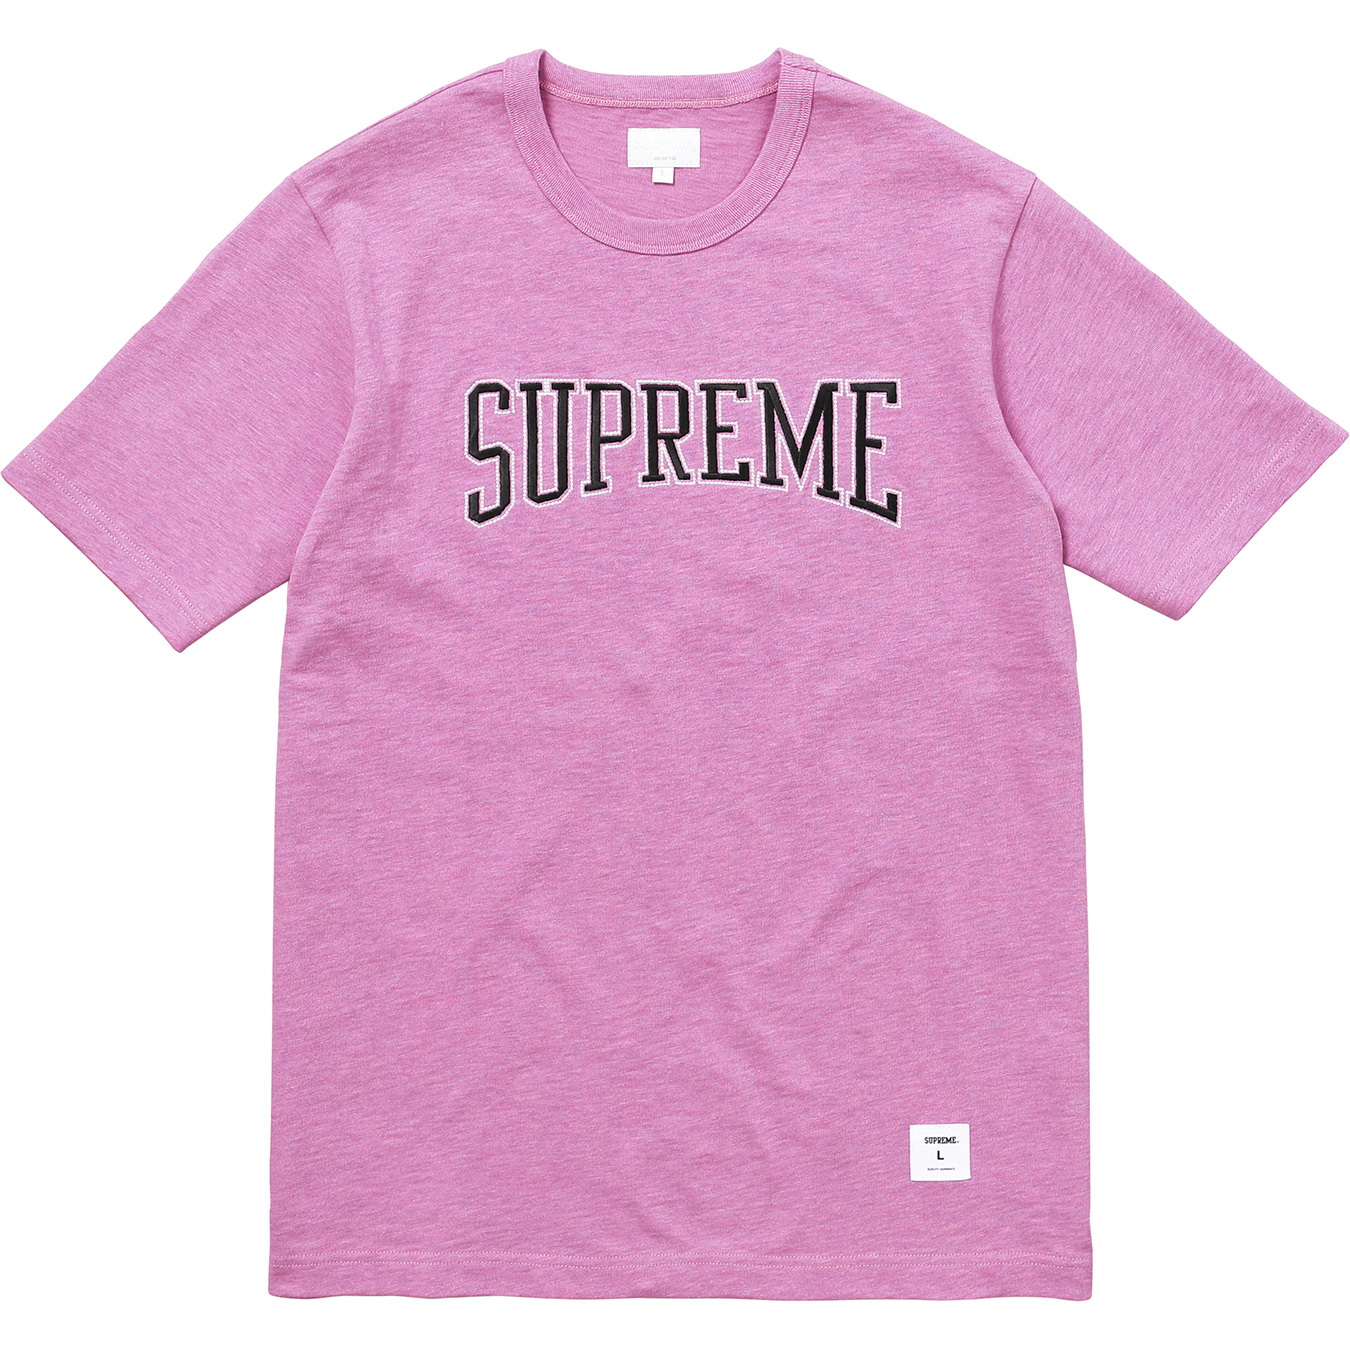 Dotted Arc Top - Supreme Community